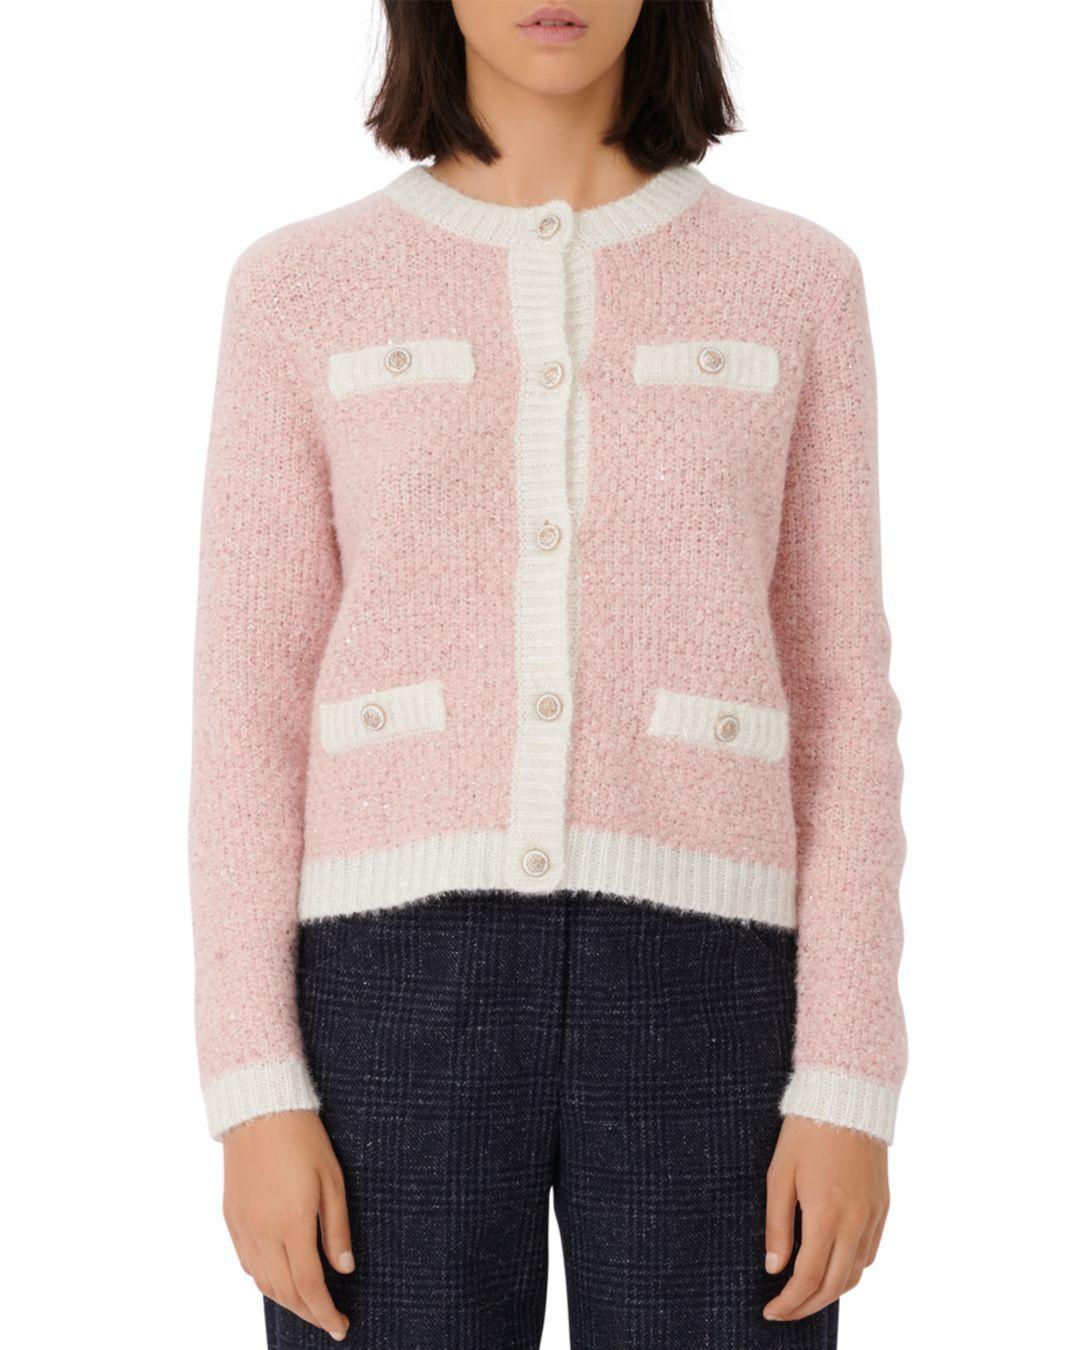 Maje Synthetic Morning Lurex Sequined Cardigan in Pale Pink (Pink) - Lyst